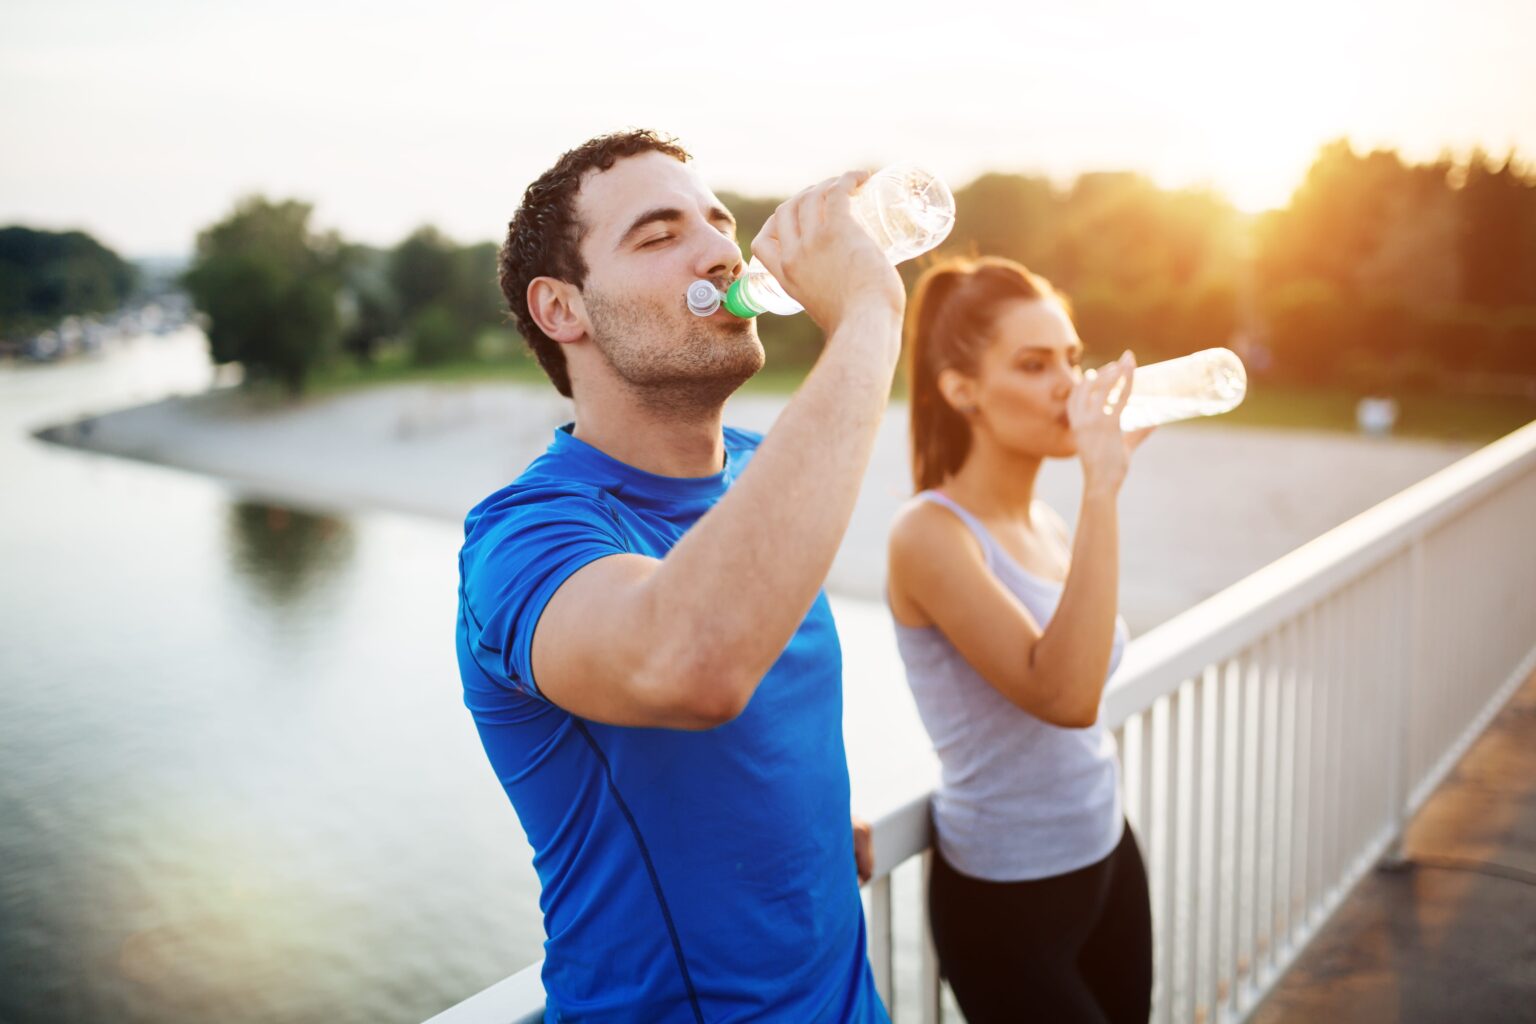 There are many different drinks available on the market, but which one is best for hydration? Find out which drink is the best for hydration.